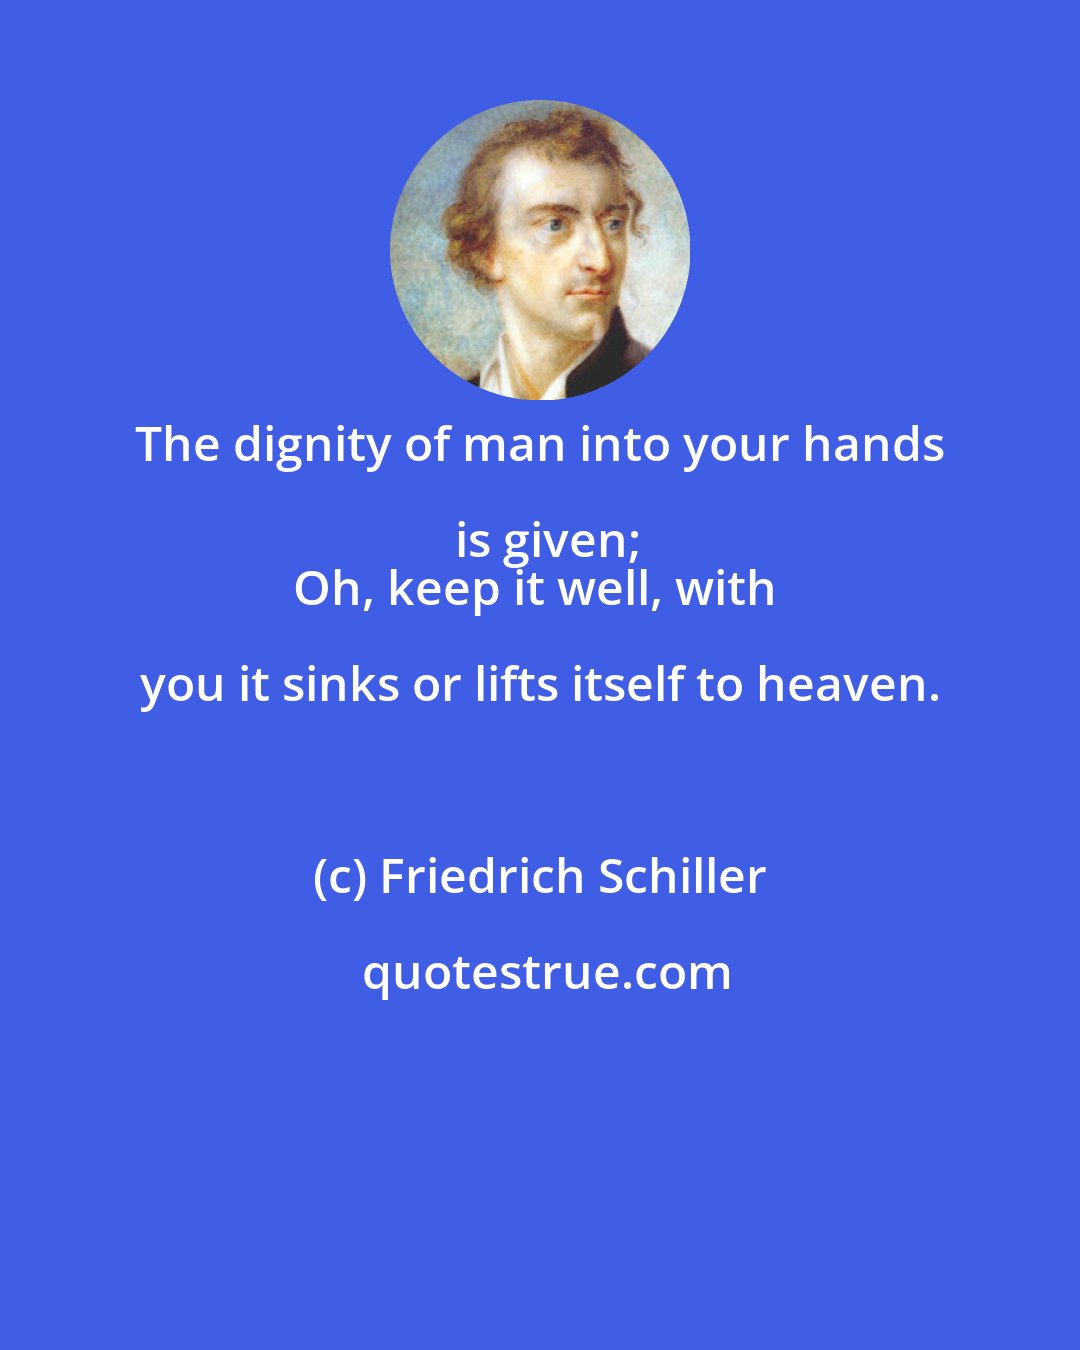 Friedrich Schiller: The dignity of man into your hands is given;
Oh, keep it well, with you it sinks or lifts itself to heaven.